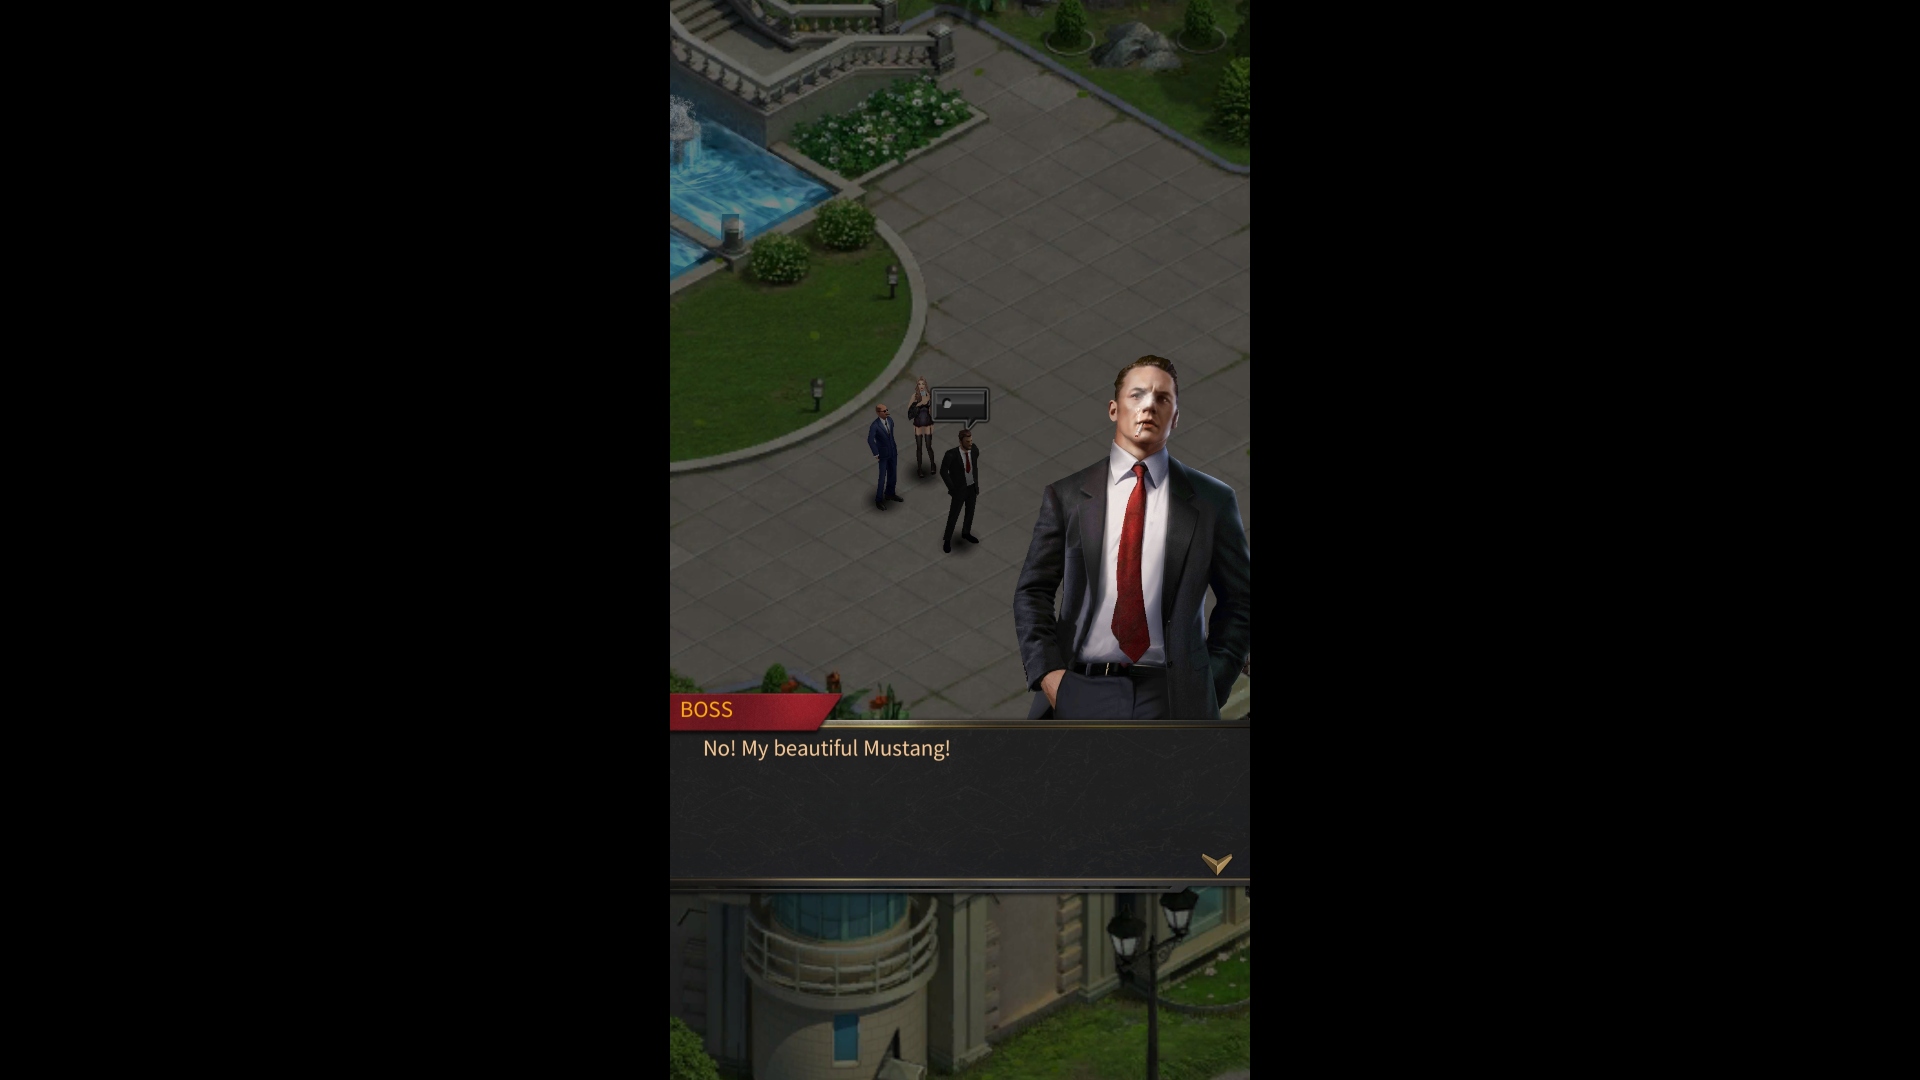 Best mobile games - Mafia City. Image shows a man saying 